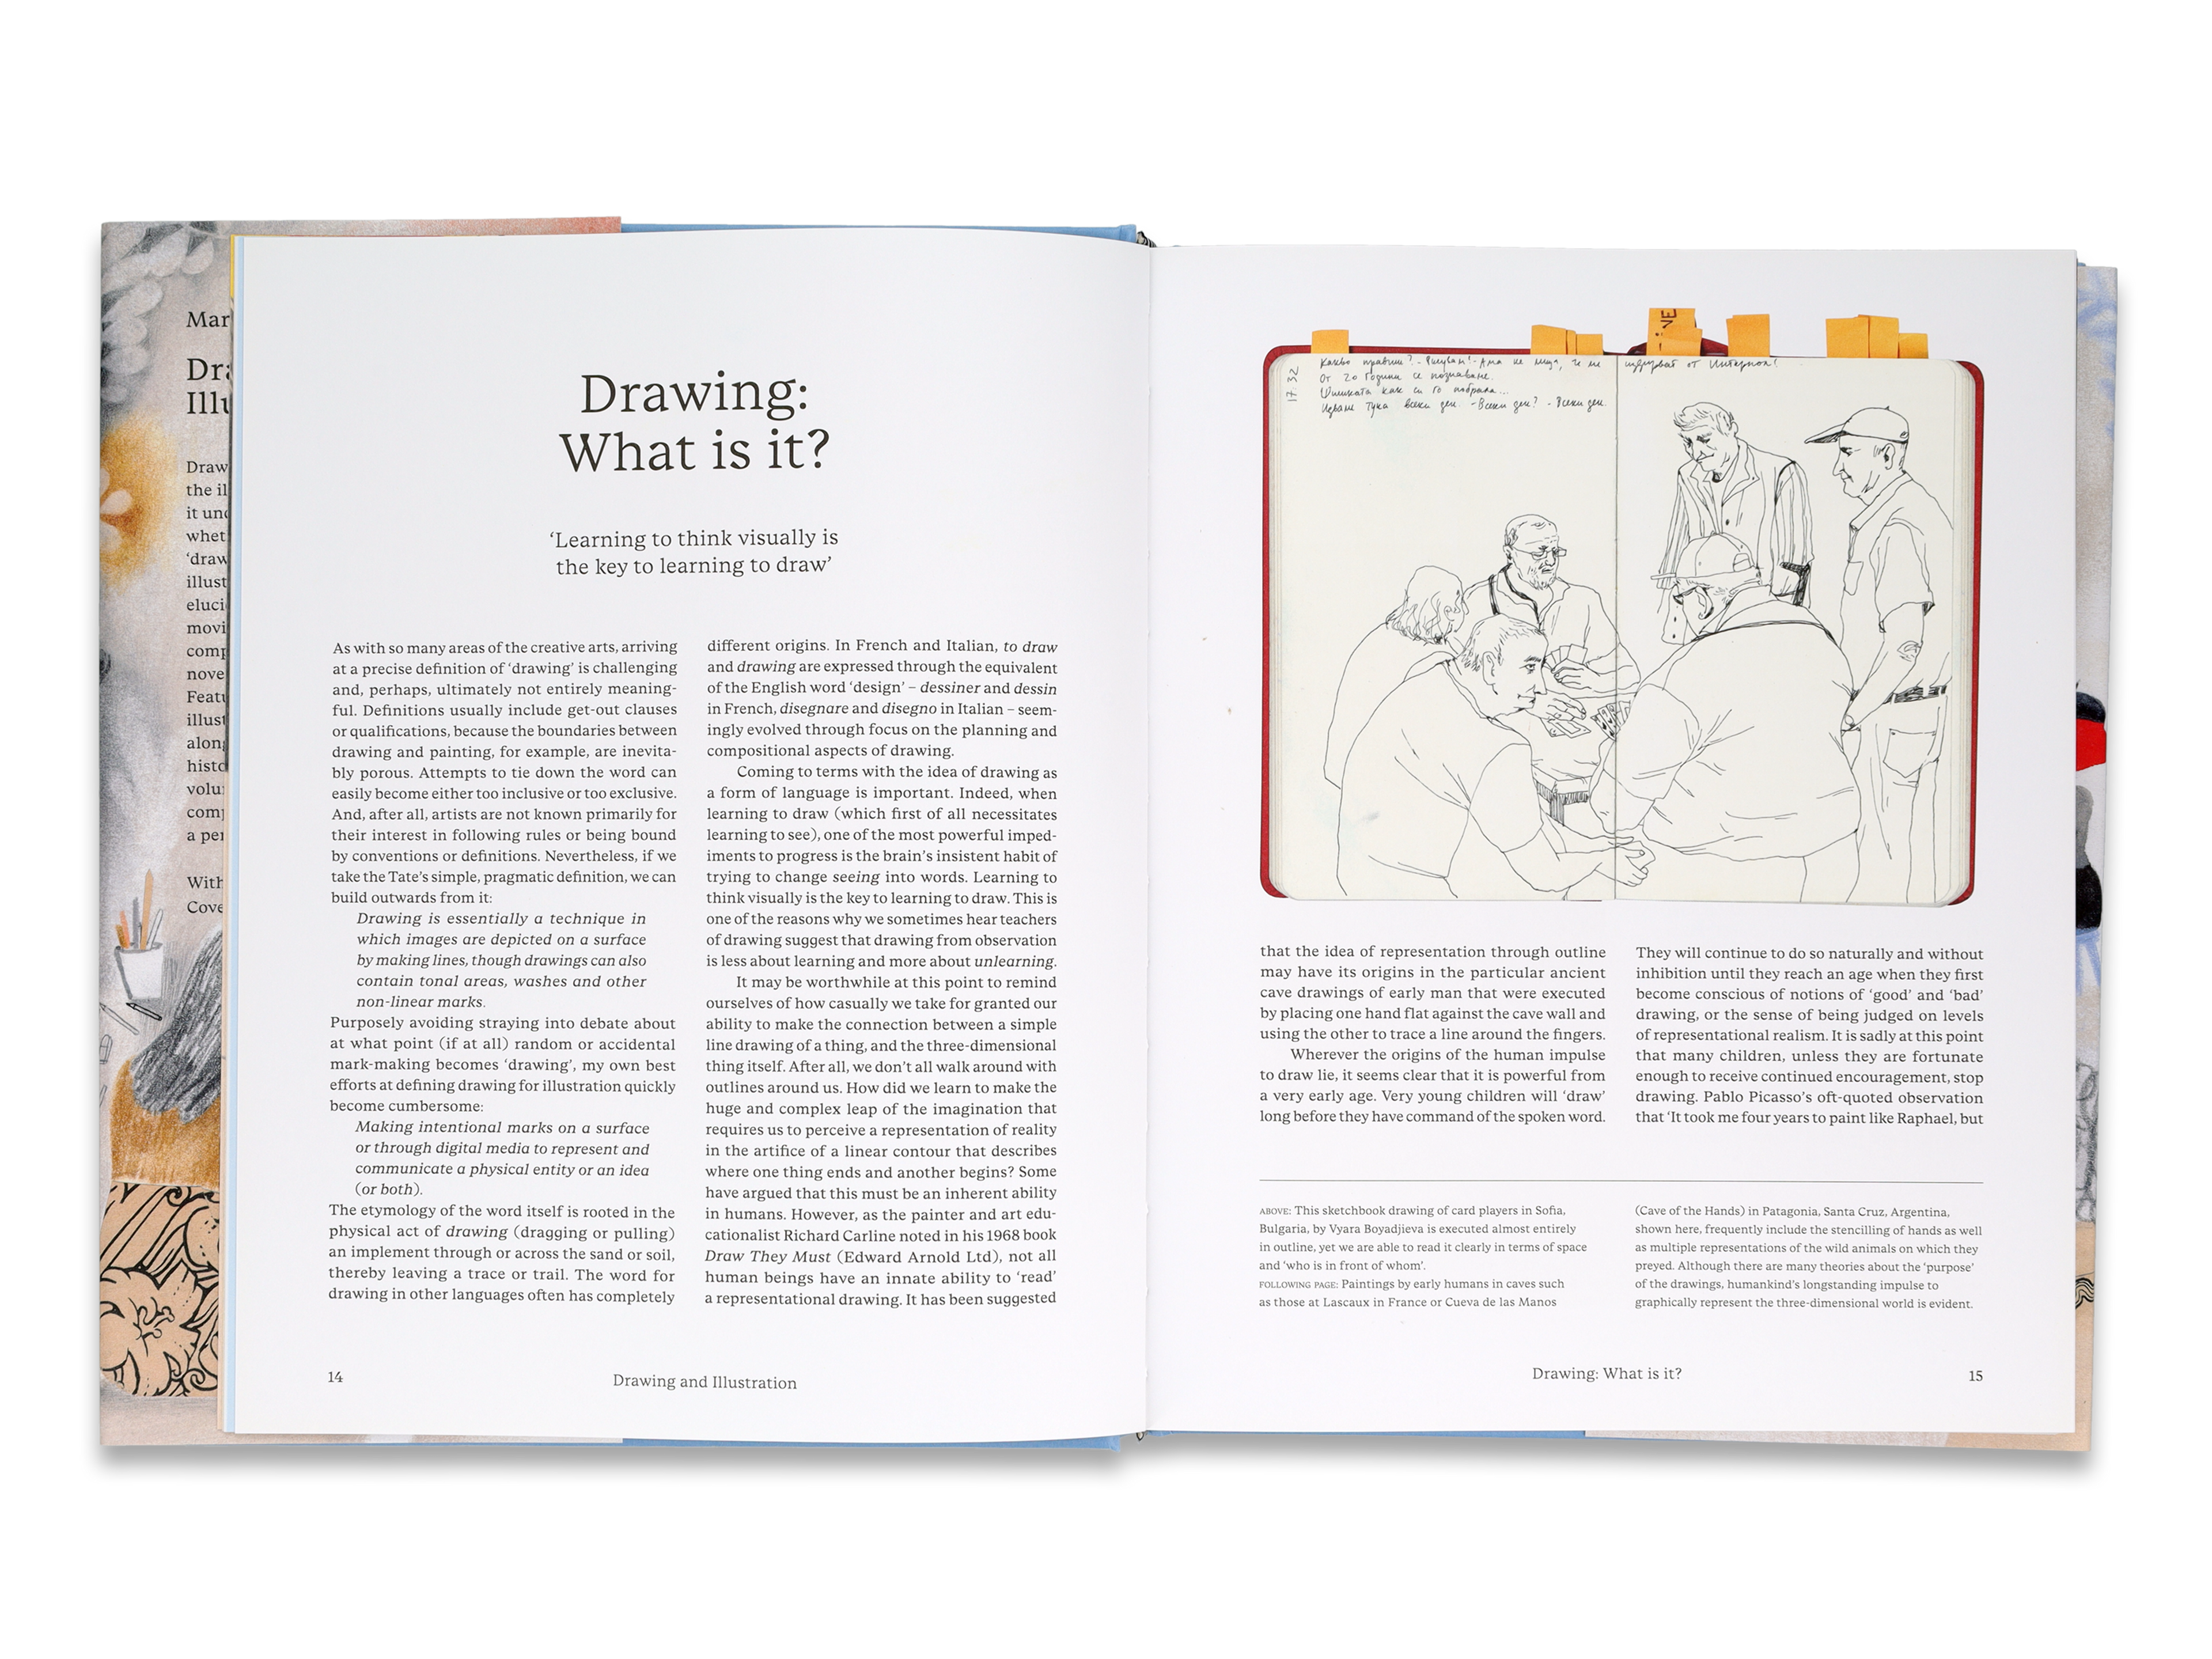 Spread from the book. The page on the right features two columns of text with the heading "Drawing: What is it?". The page on the right includes an artist sketchbook spread.